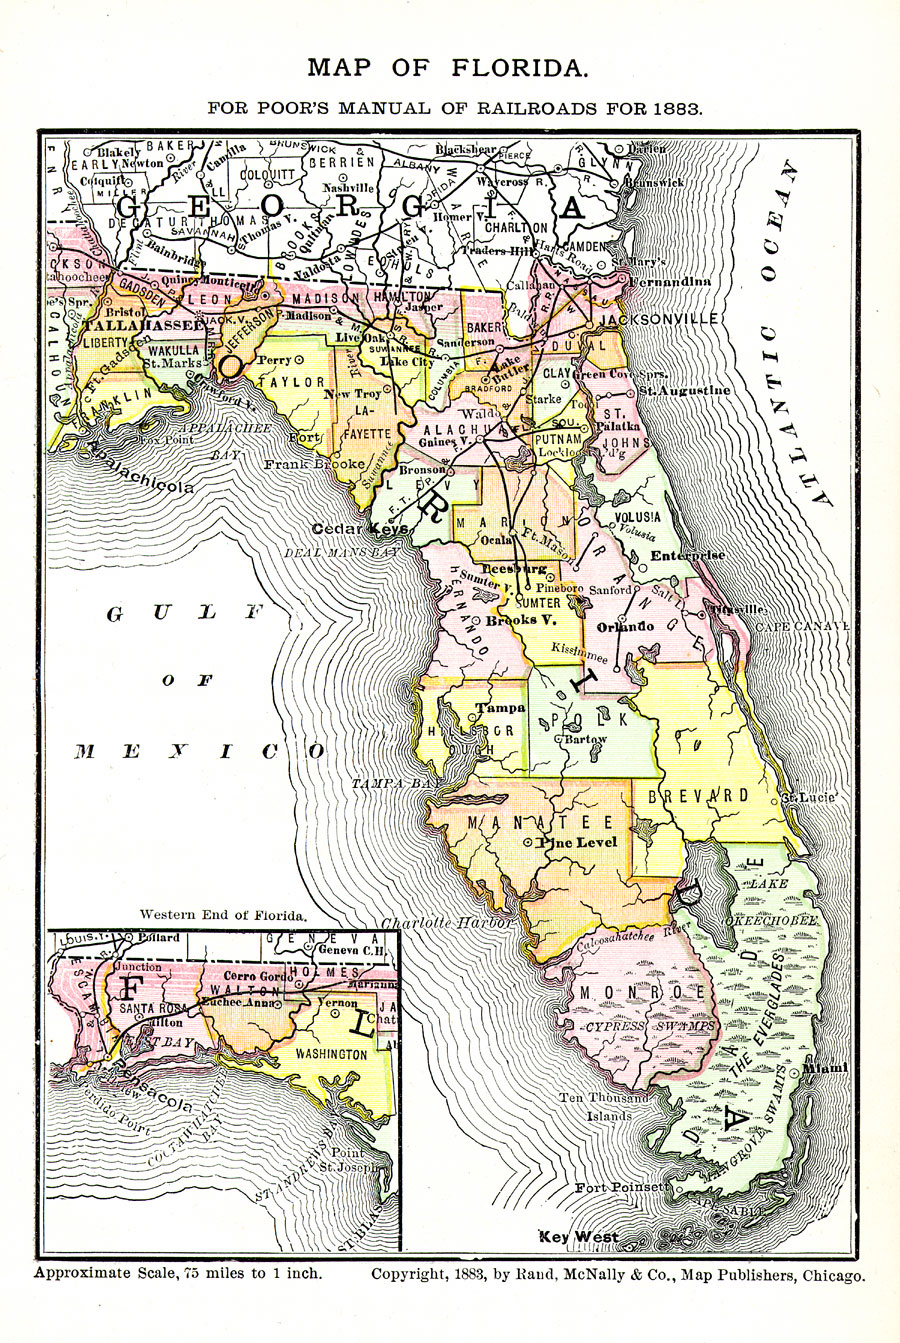 Map of Florida for Poor's Manual of Railroads